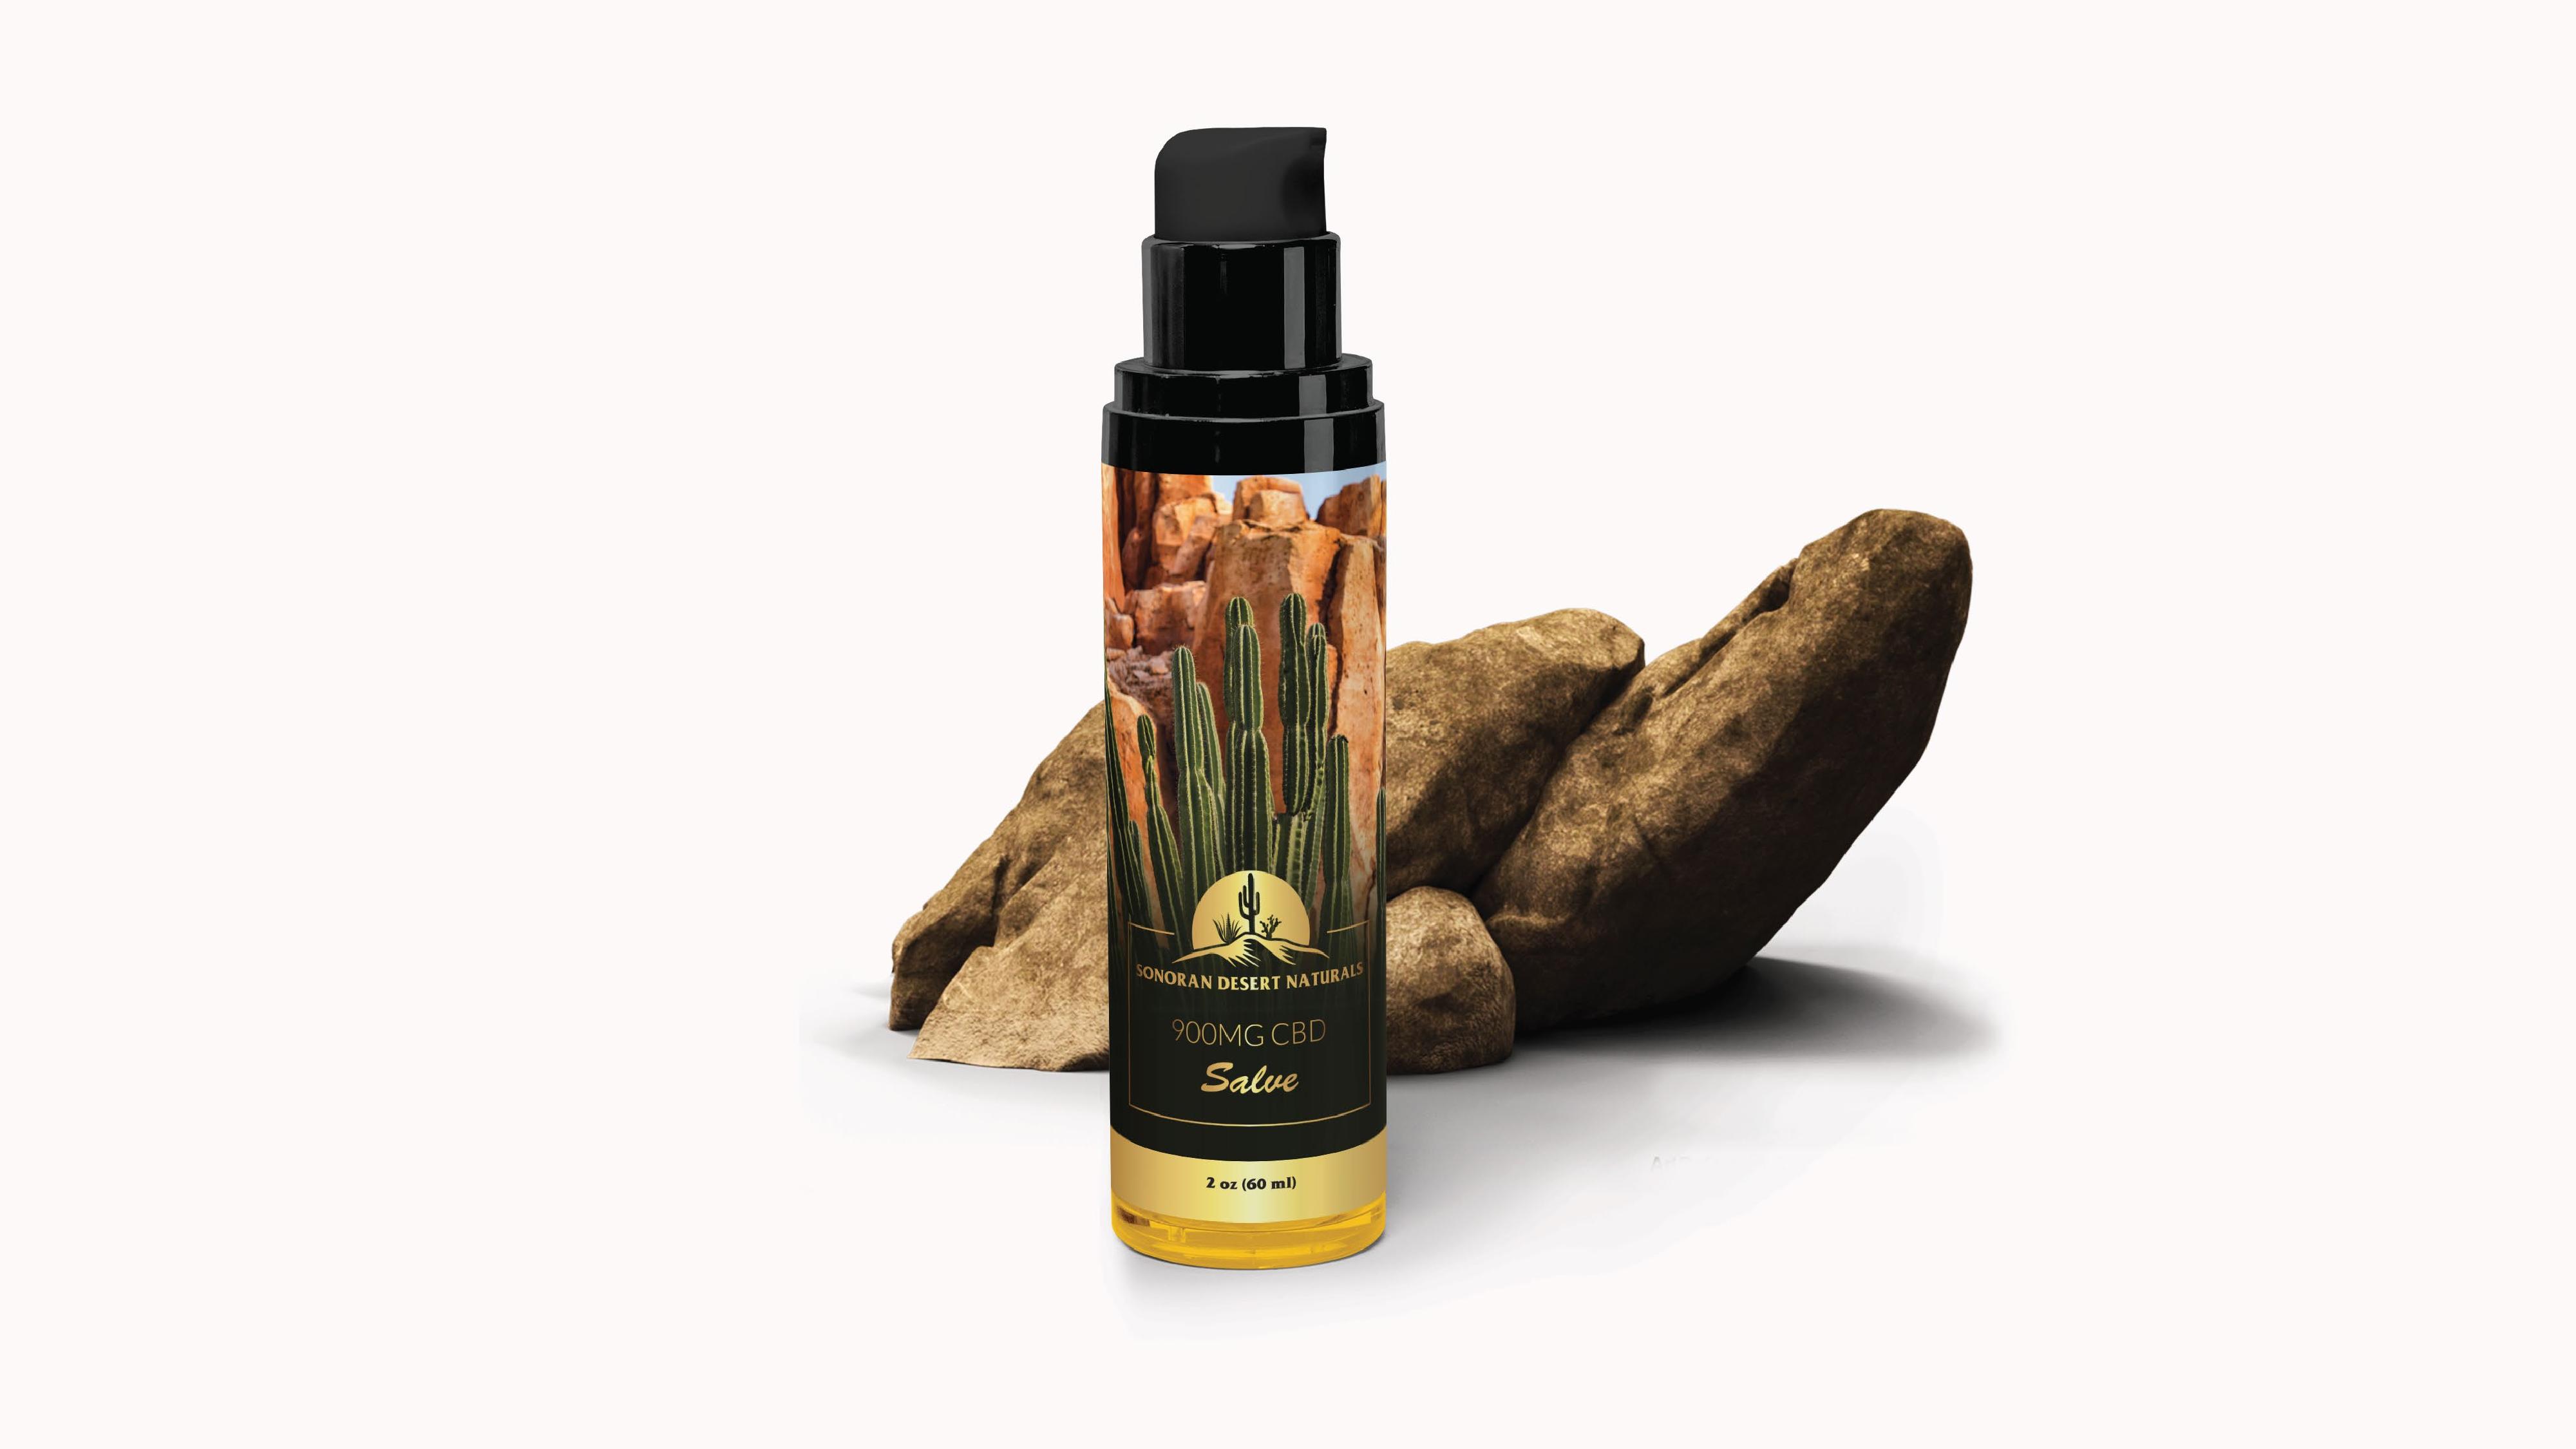 featured image four:Sonoran Desert Naturals Product Line